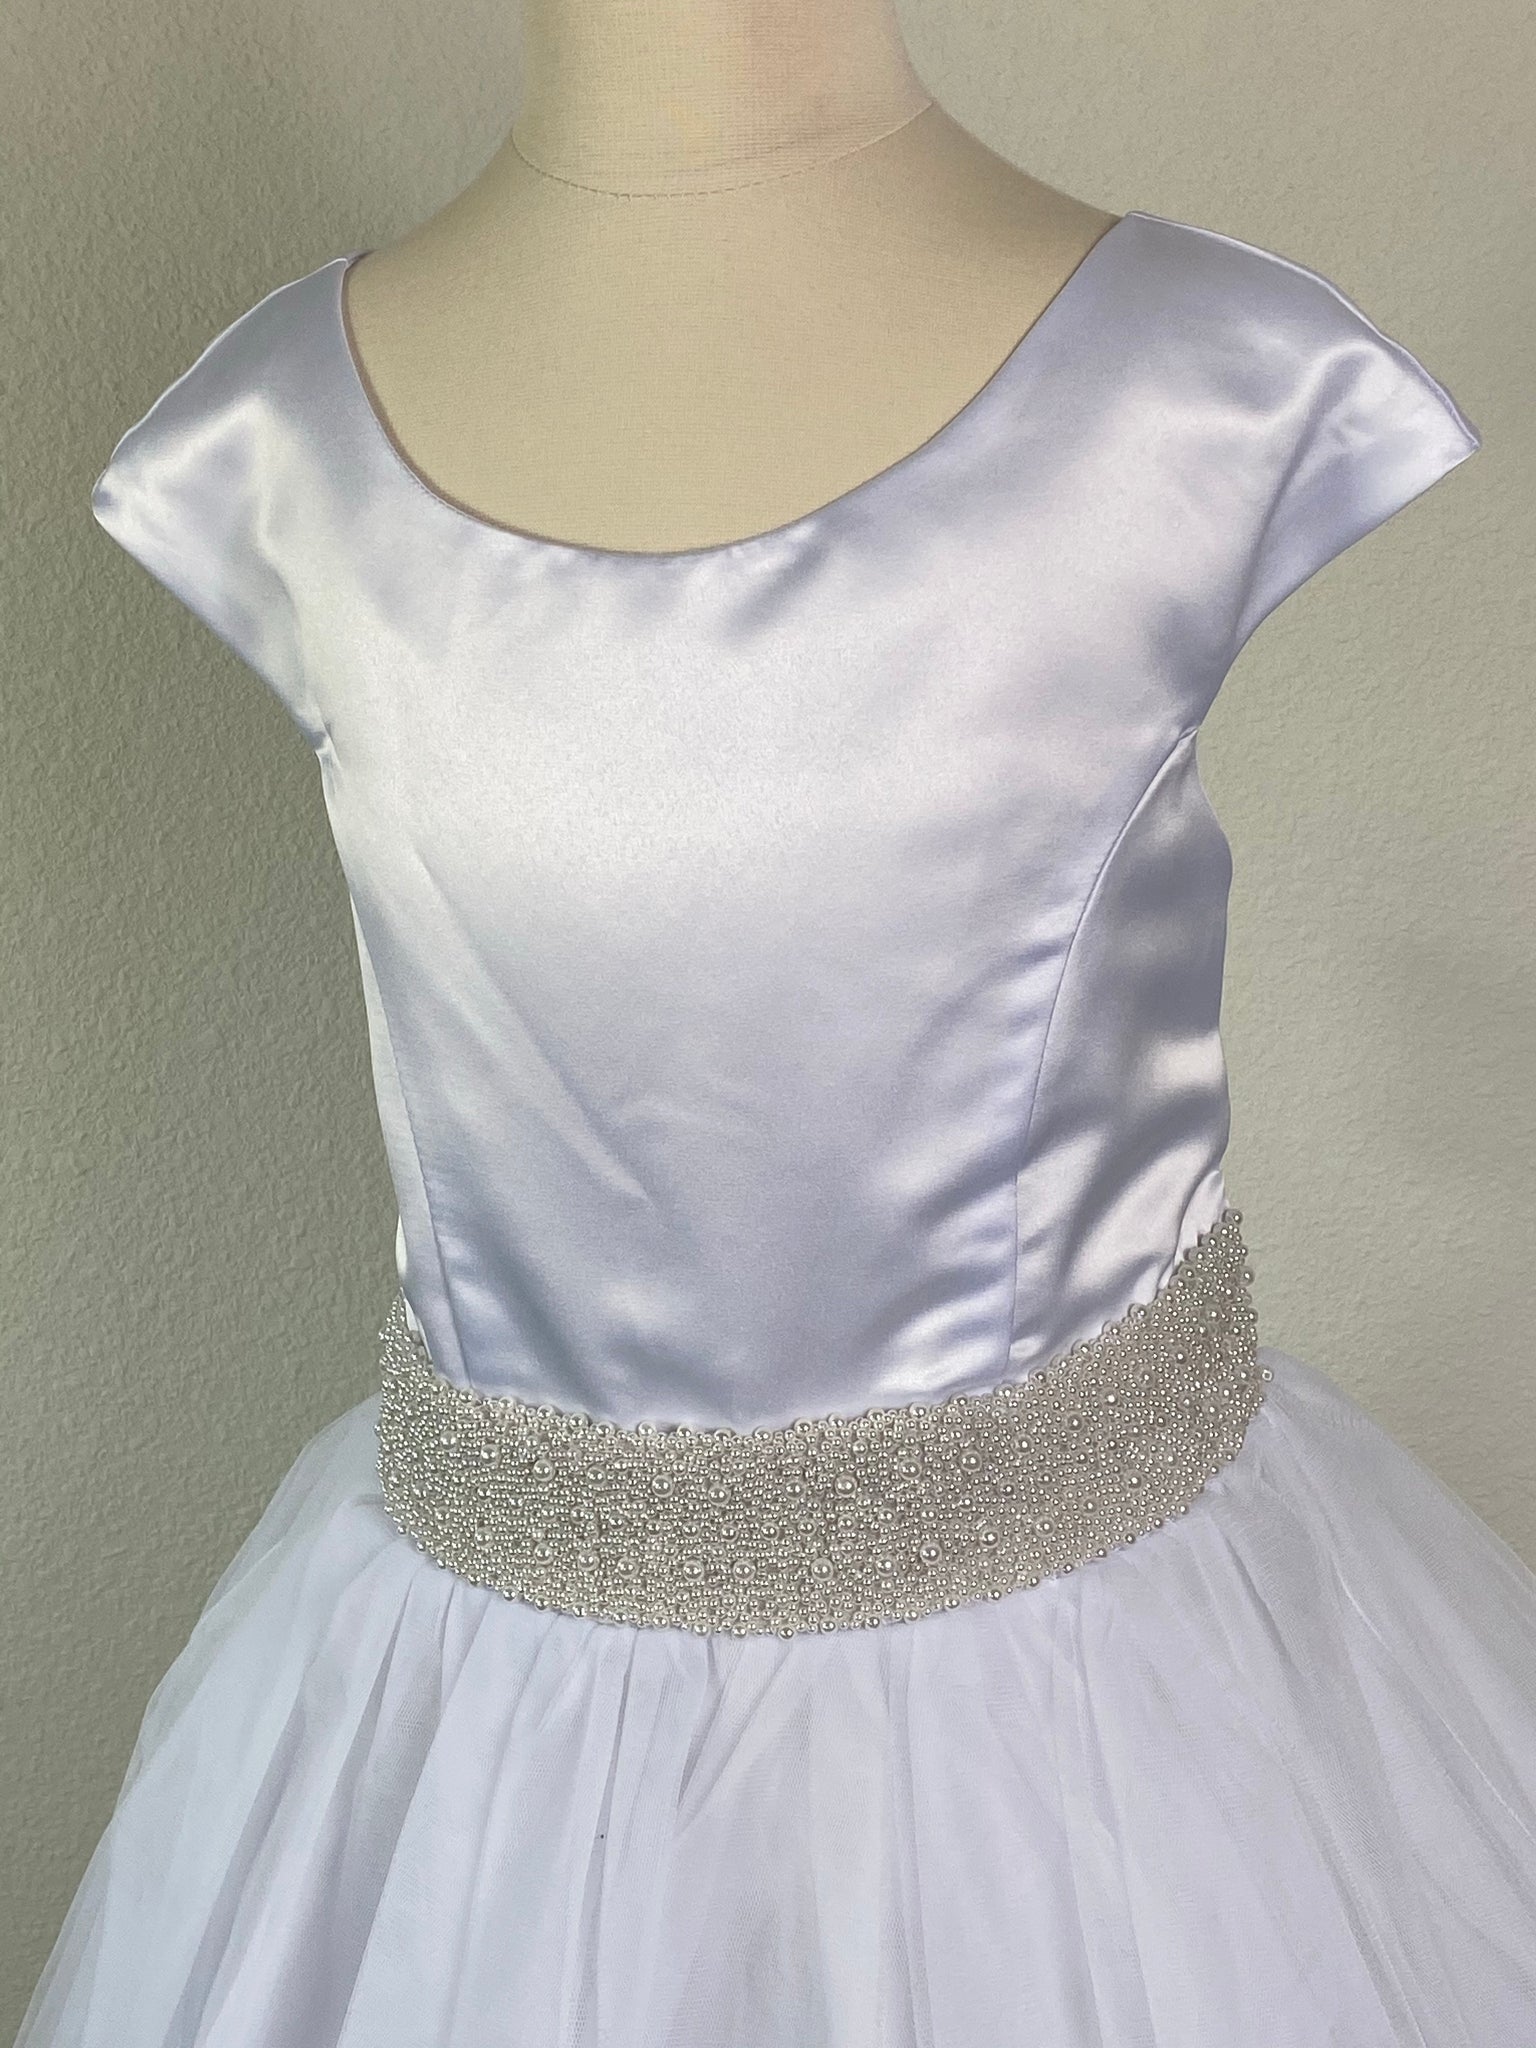 White, size 10 Satin bodice Wide pearl belt Tulle overlay with embroidered detailing Satin trim along skirt Zipper closure Satin Ribbon for bow